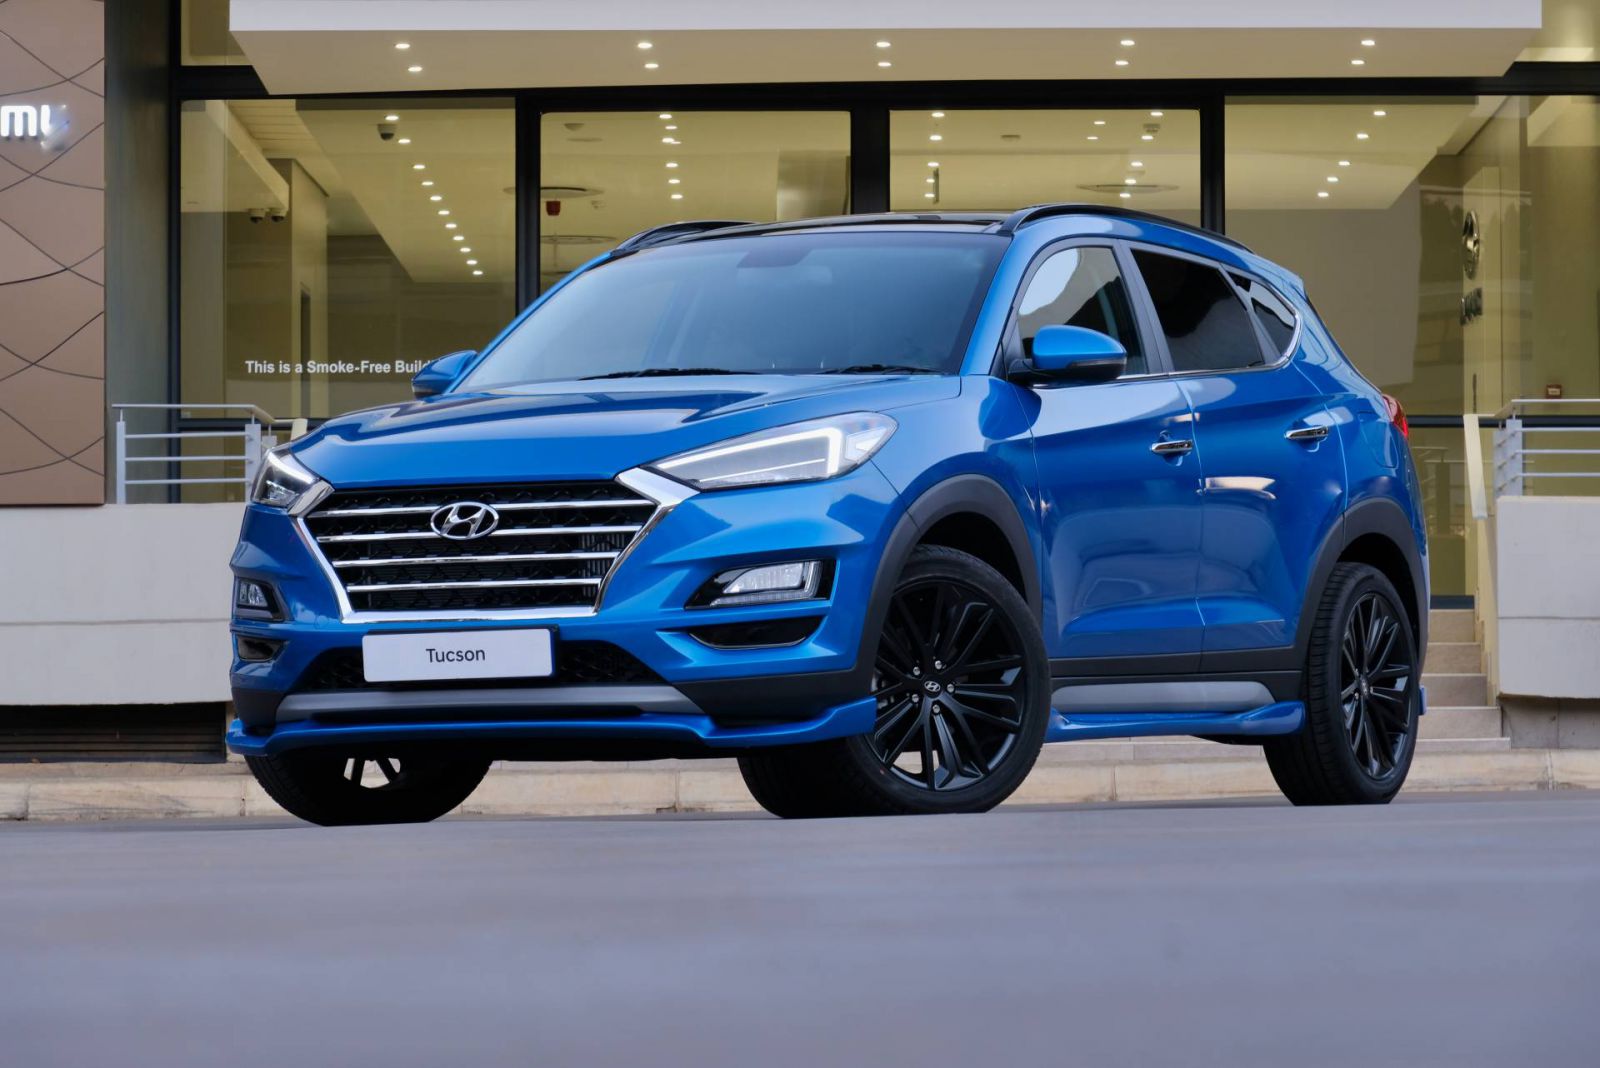 Tested 2019 Hyundai Tucson Succeeds at Being Smart and Sensible